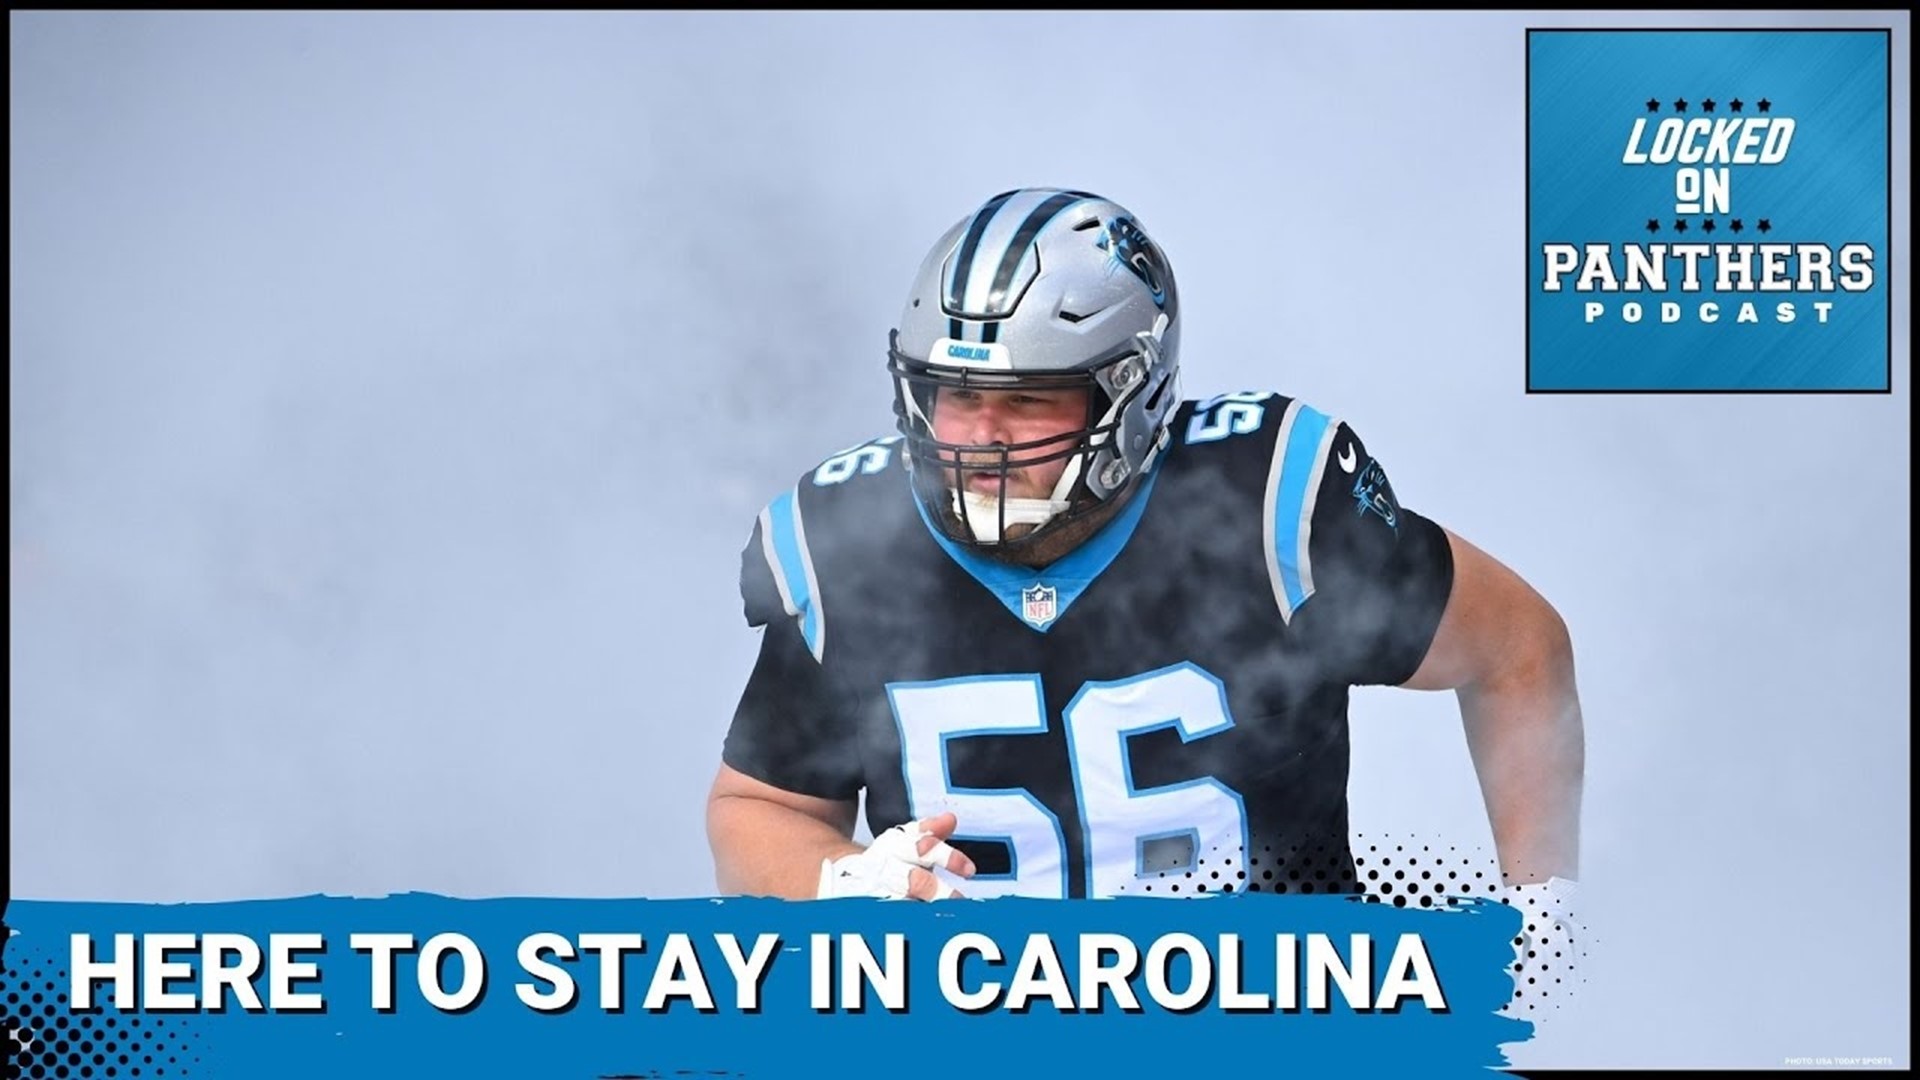 Carolina Panthers GM Scott Fitterer let it known prior to the offseason that re-signing starting center Bradley Bozeman was a priority for him and the front office.